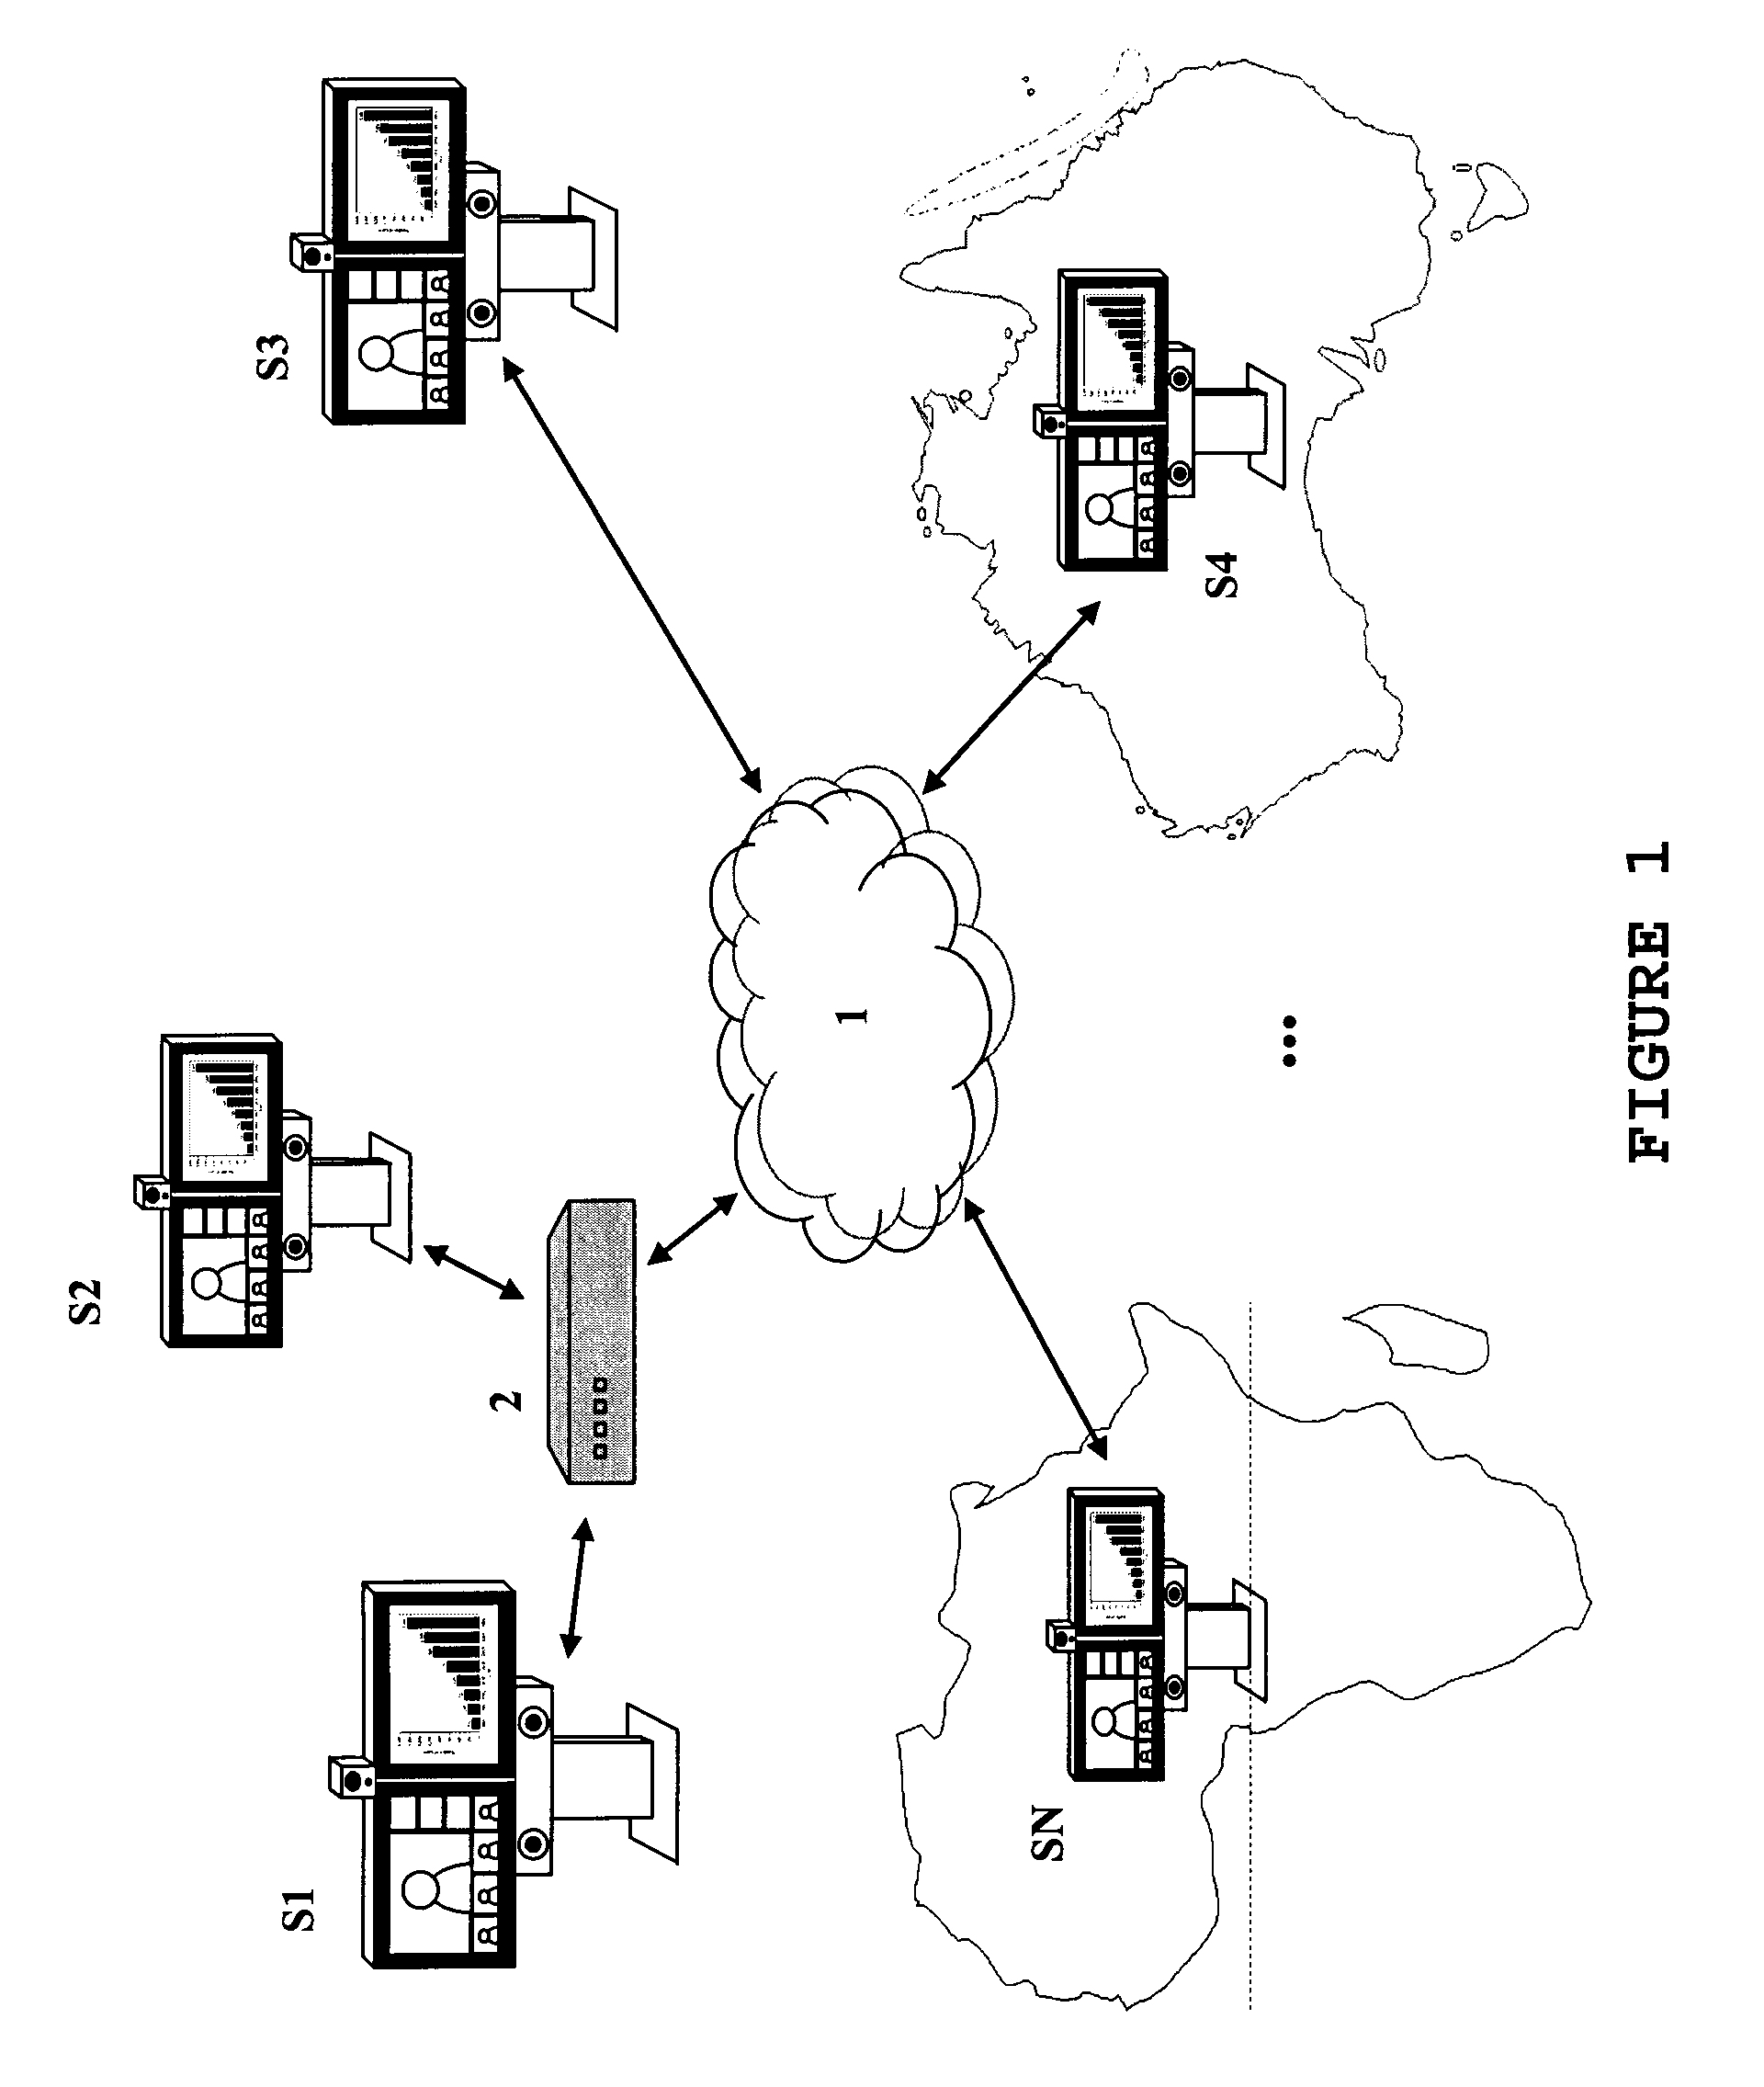 Method and apparatus for video conferencing having dynamic layout based on keyword detection